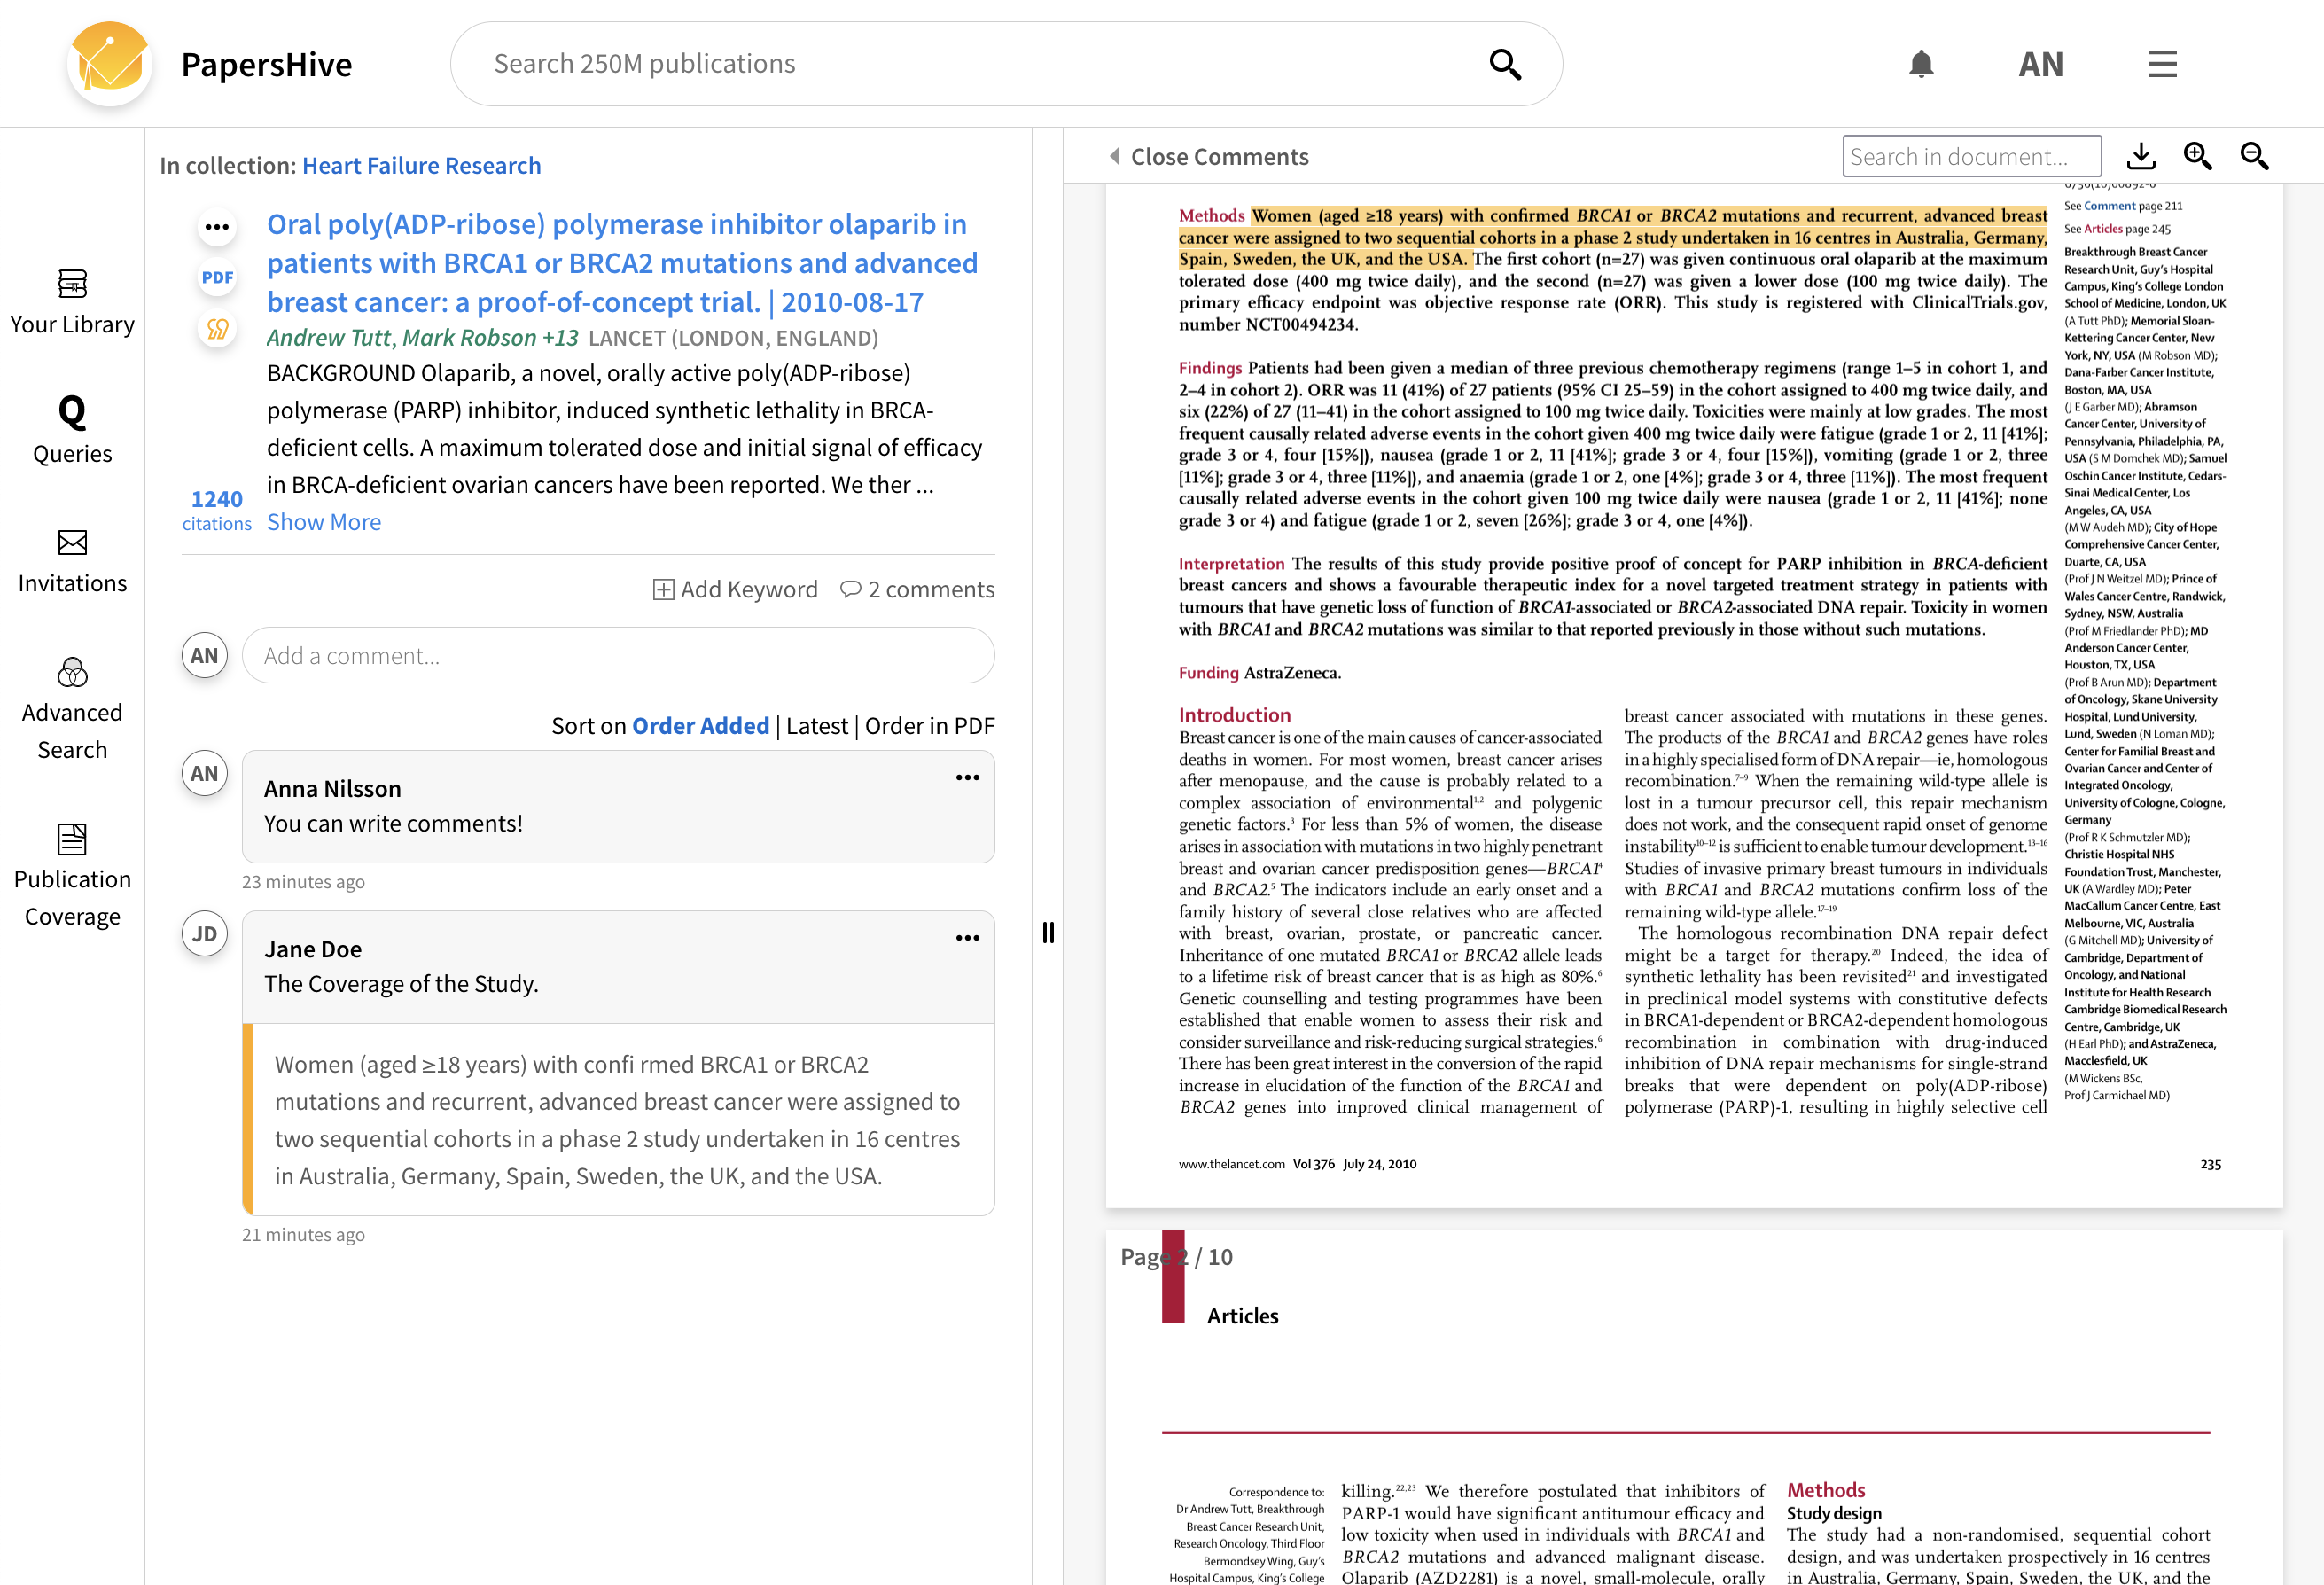 PDF view scrolled to highlight